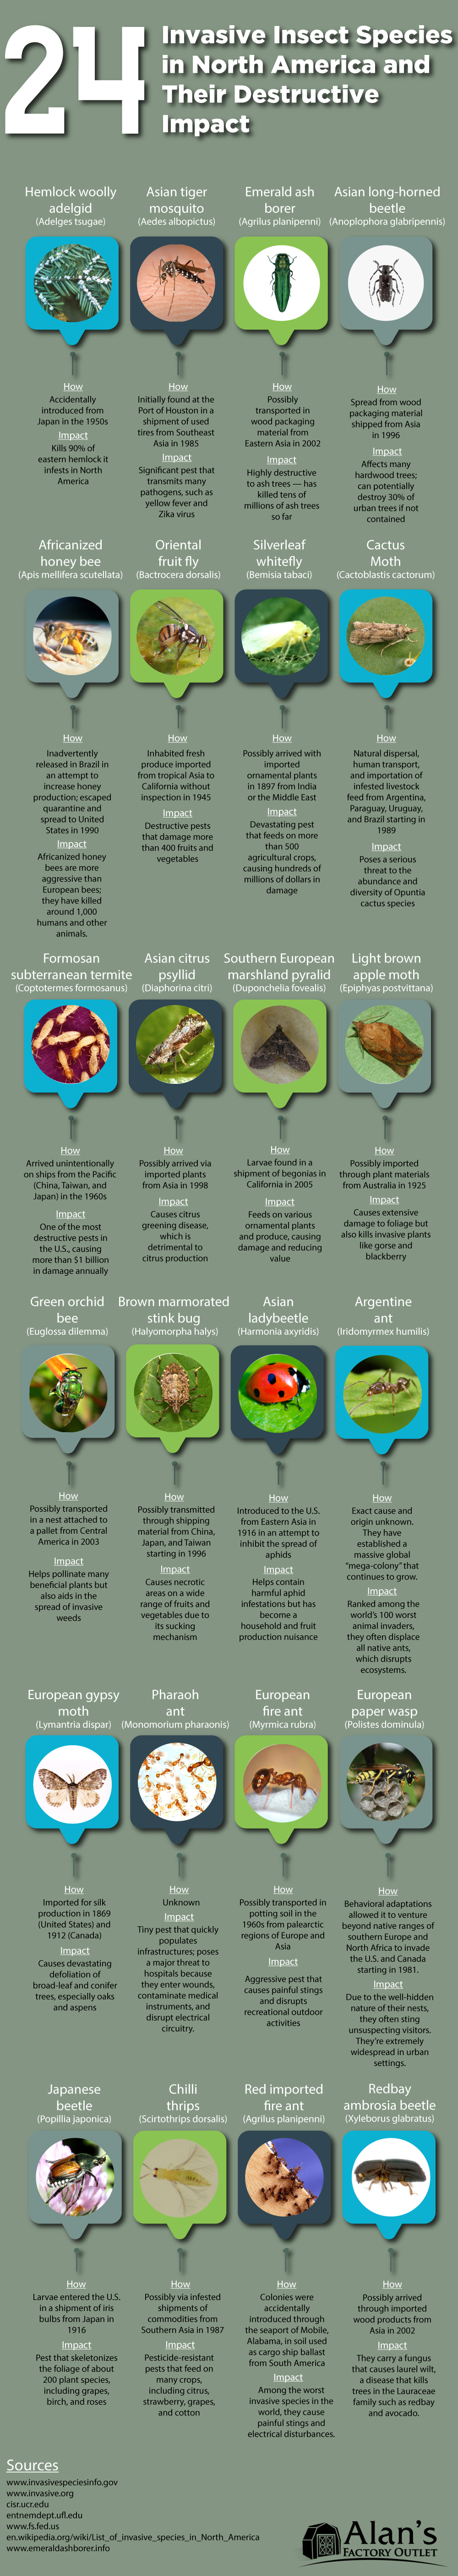 24 Invasive Insect Species in North America and Their Destructive Impact #infographic